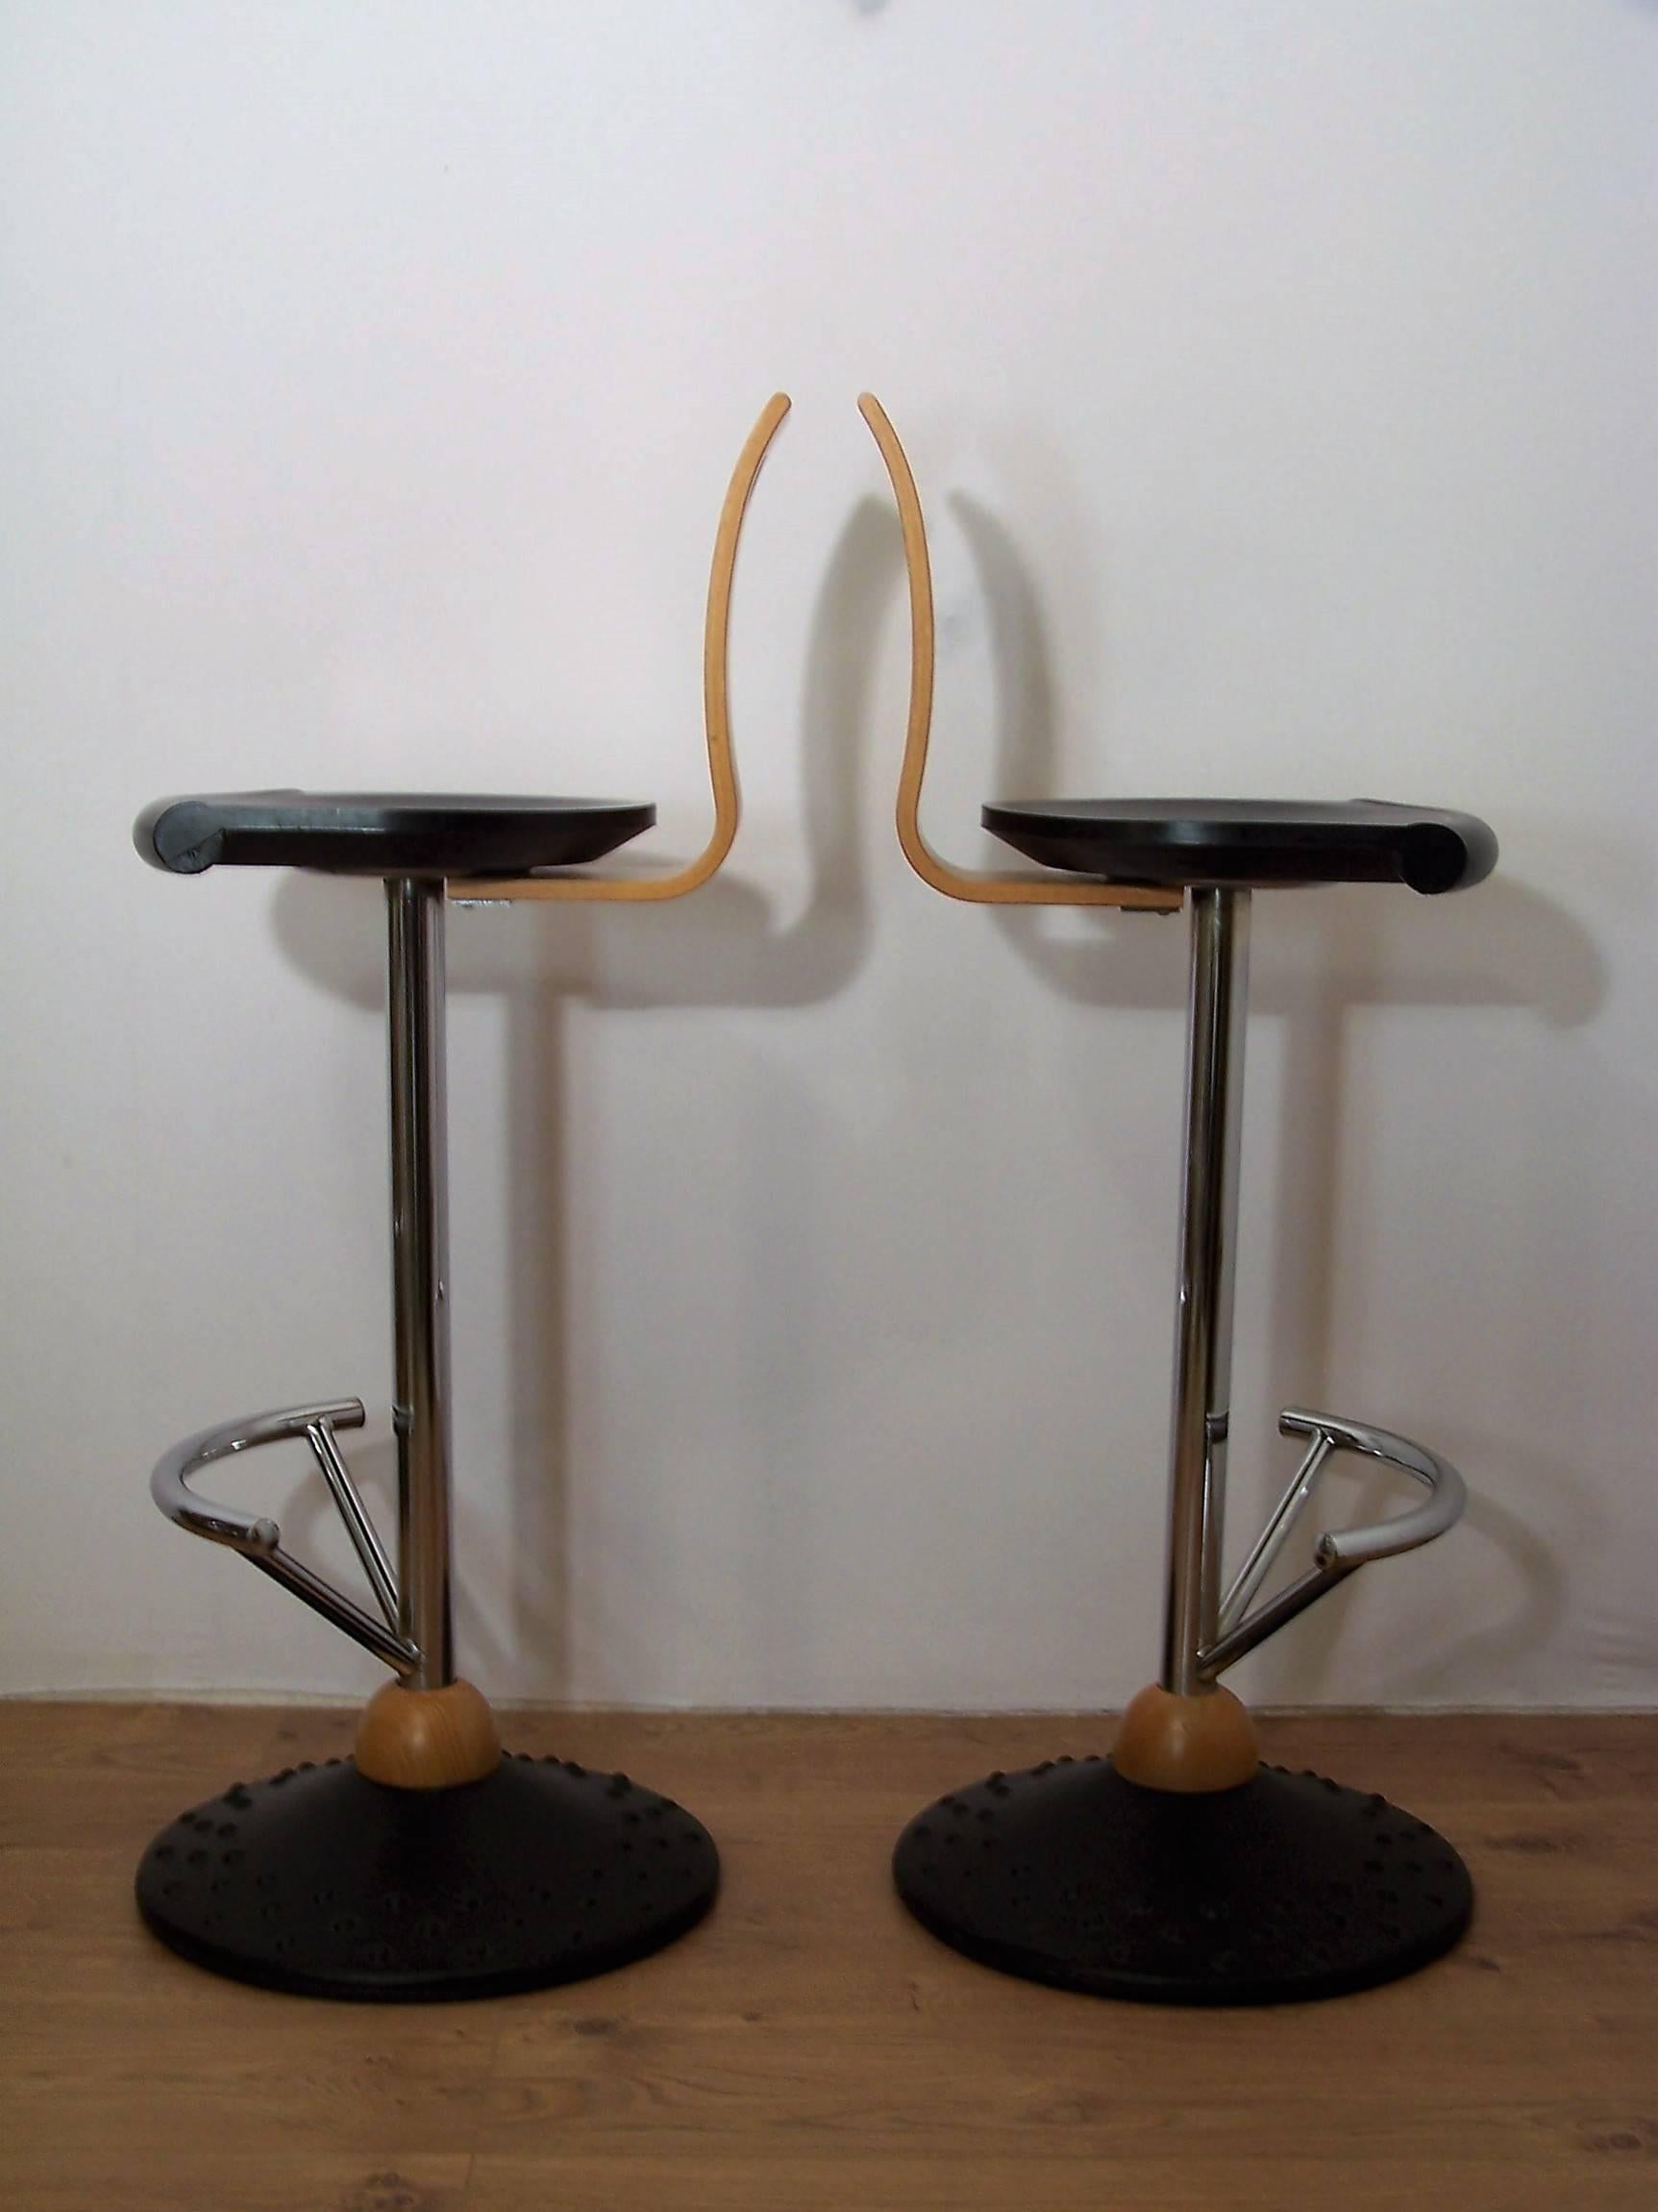 This stool can be found in the TV studio Le Pub. It was designed by Mirima in the 1990s. 
Fixed seat (height 80cm)
Chromed steel frame
Black seat and ergonomic backrest in varnished beech.